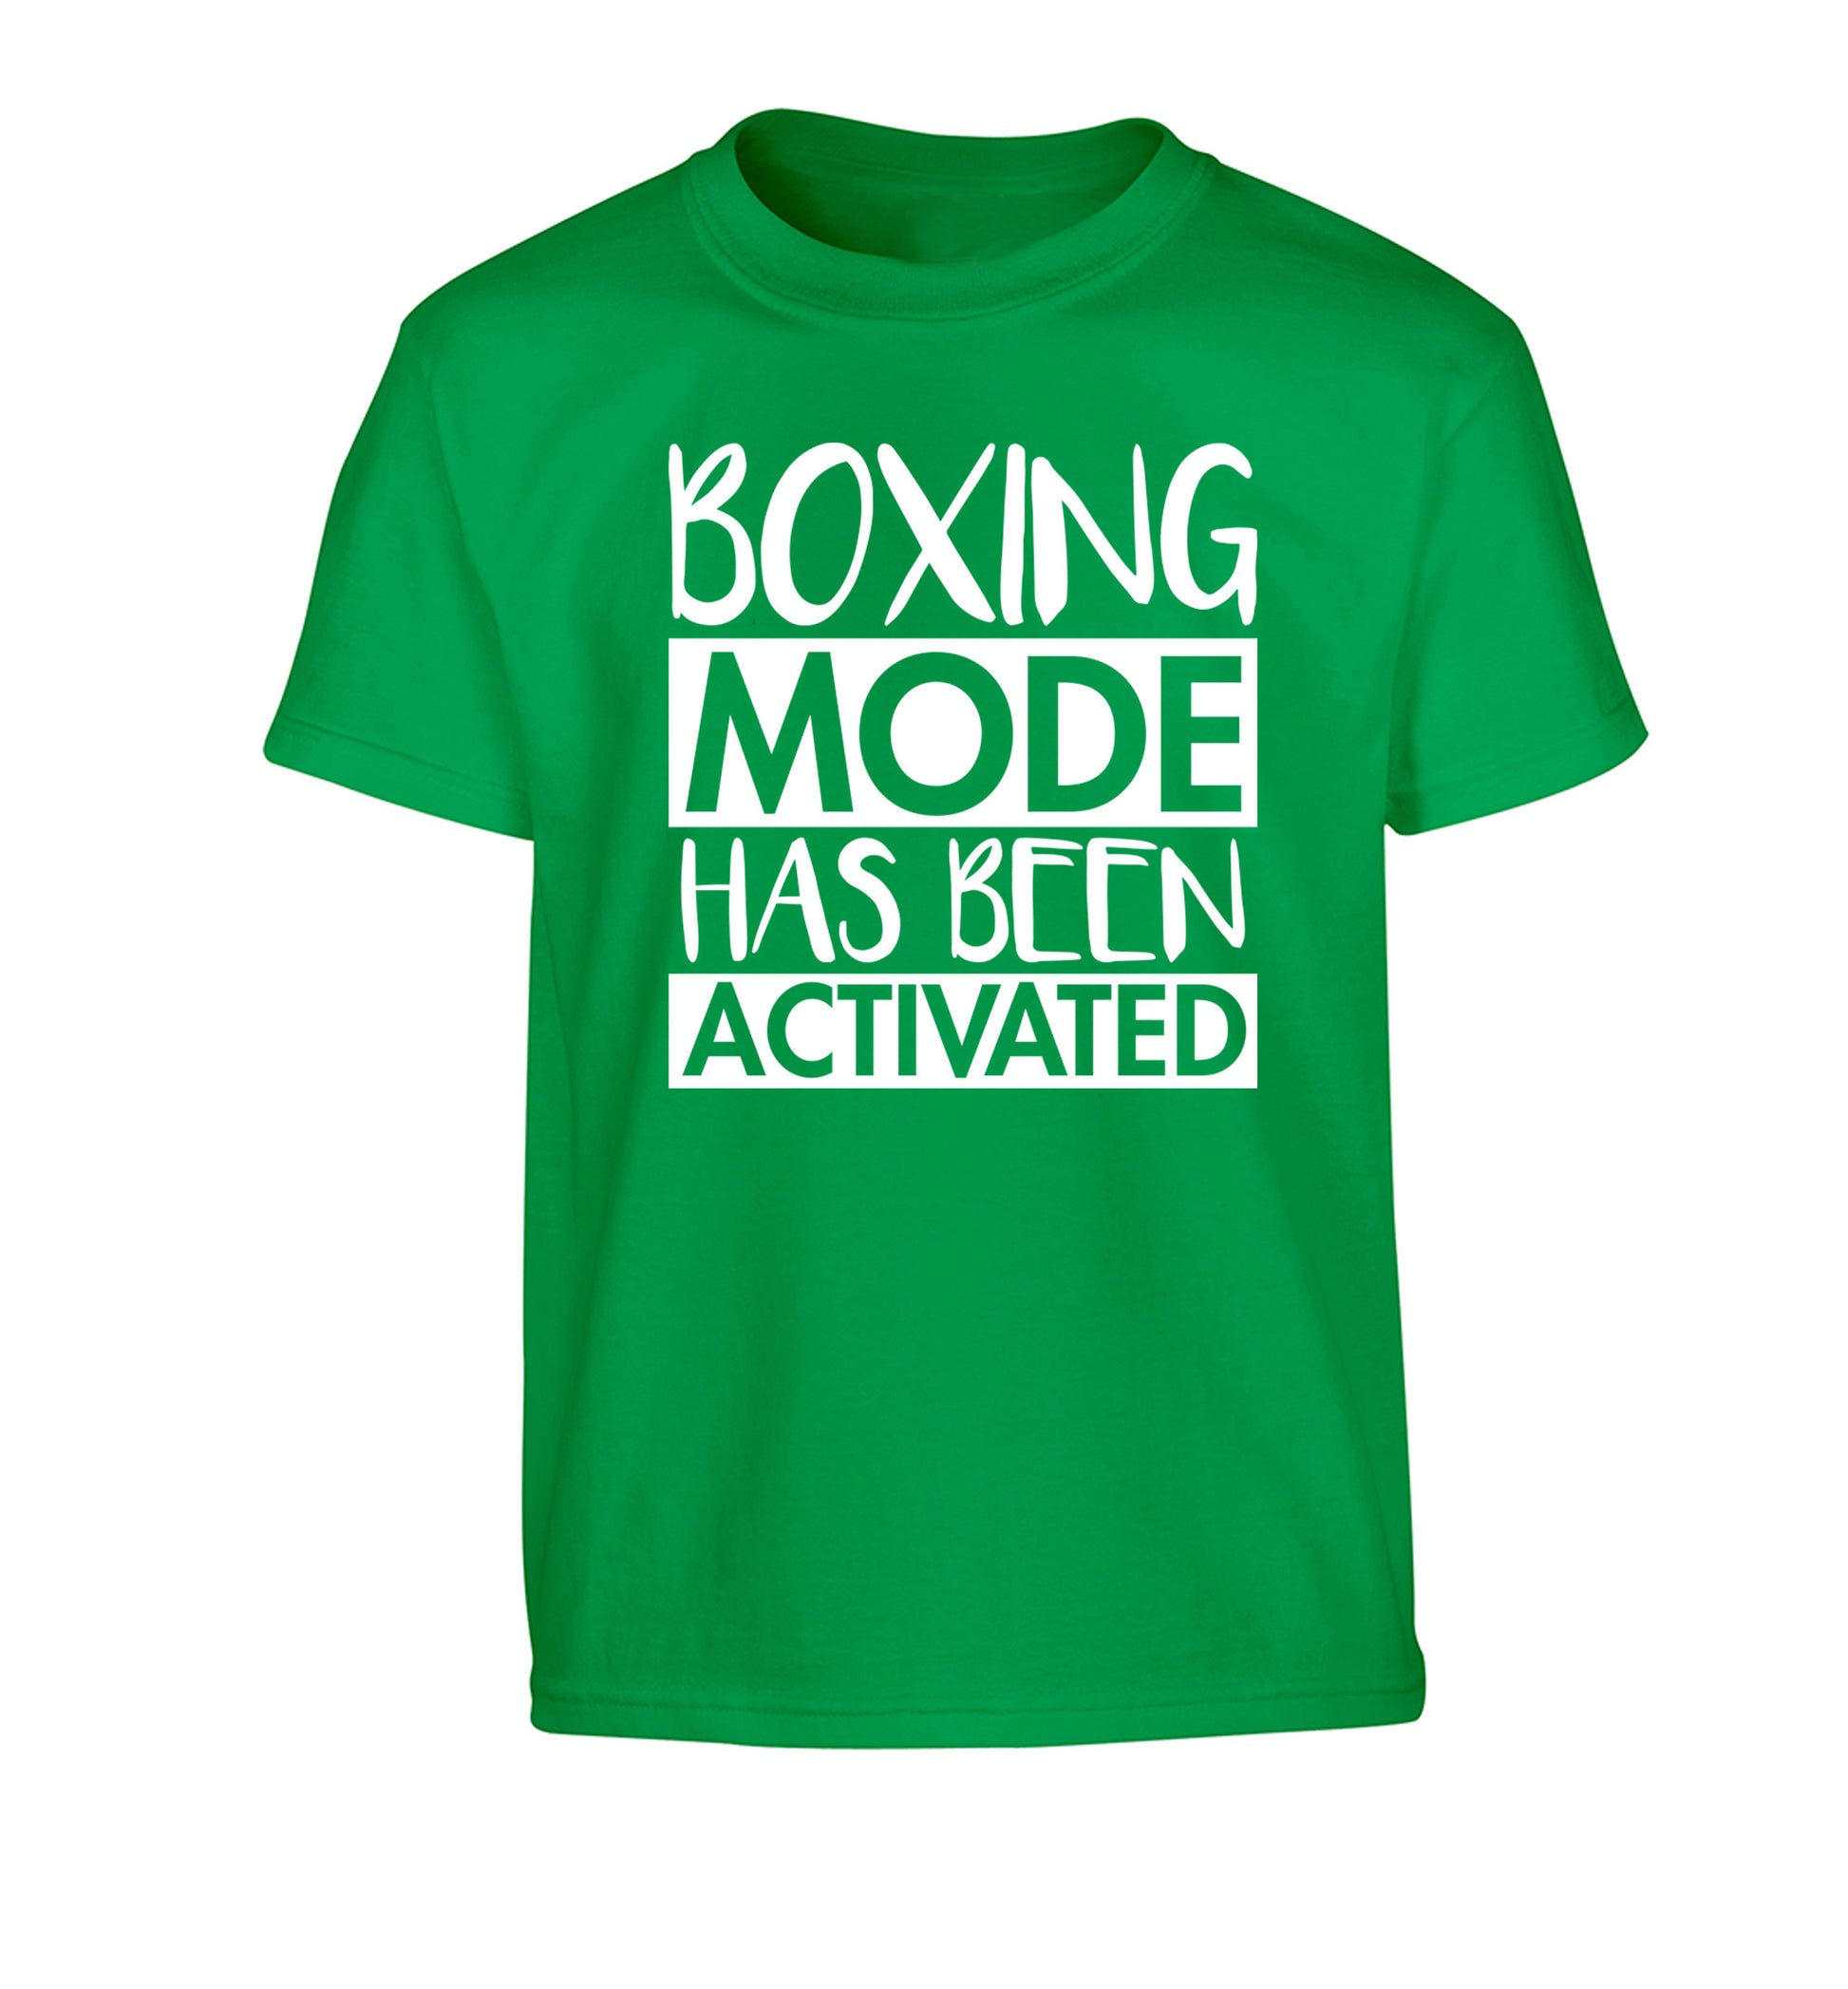 Boxing mode activated Children's green Tshirt 12-14 Years